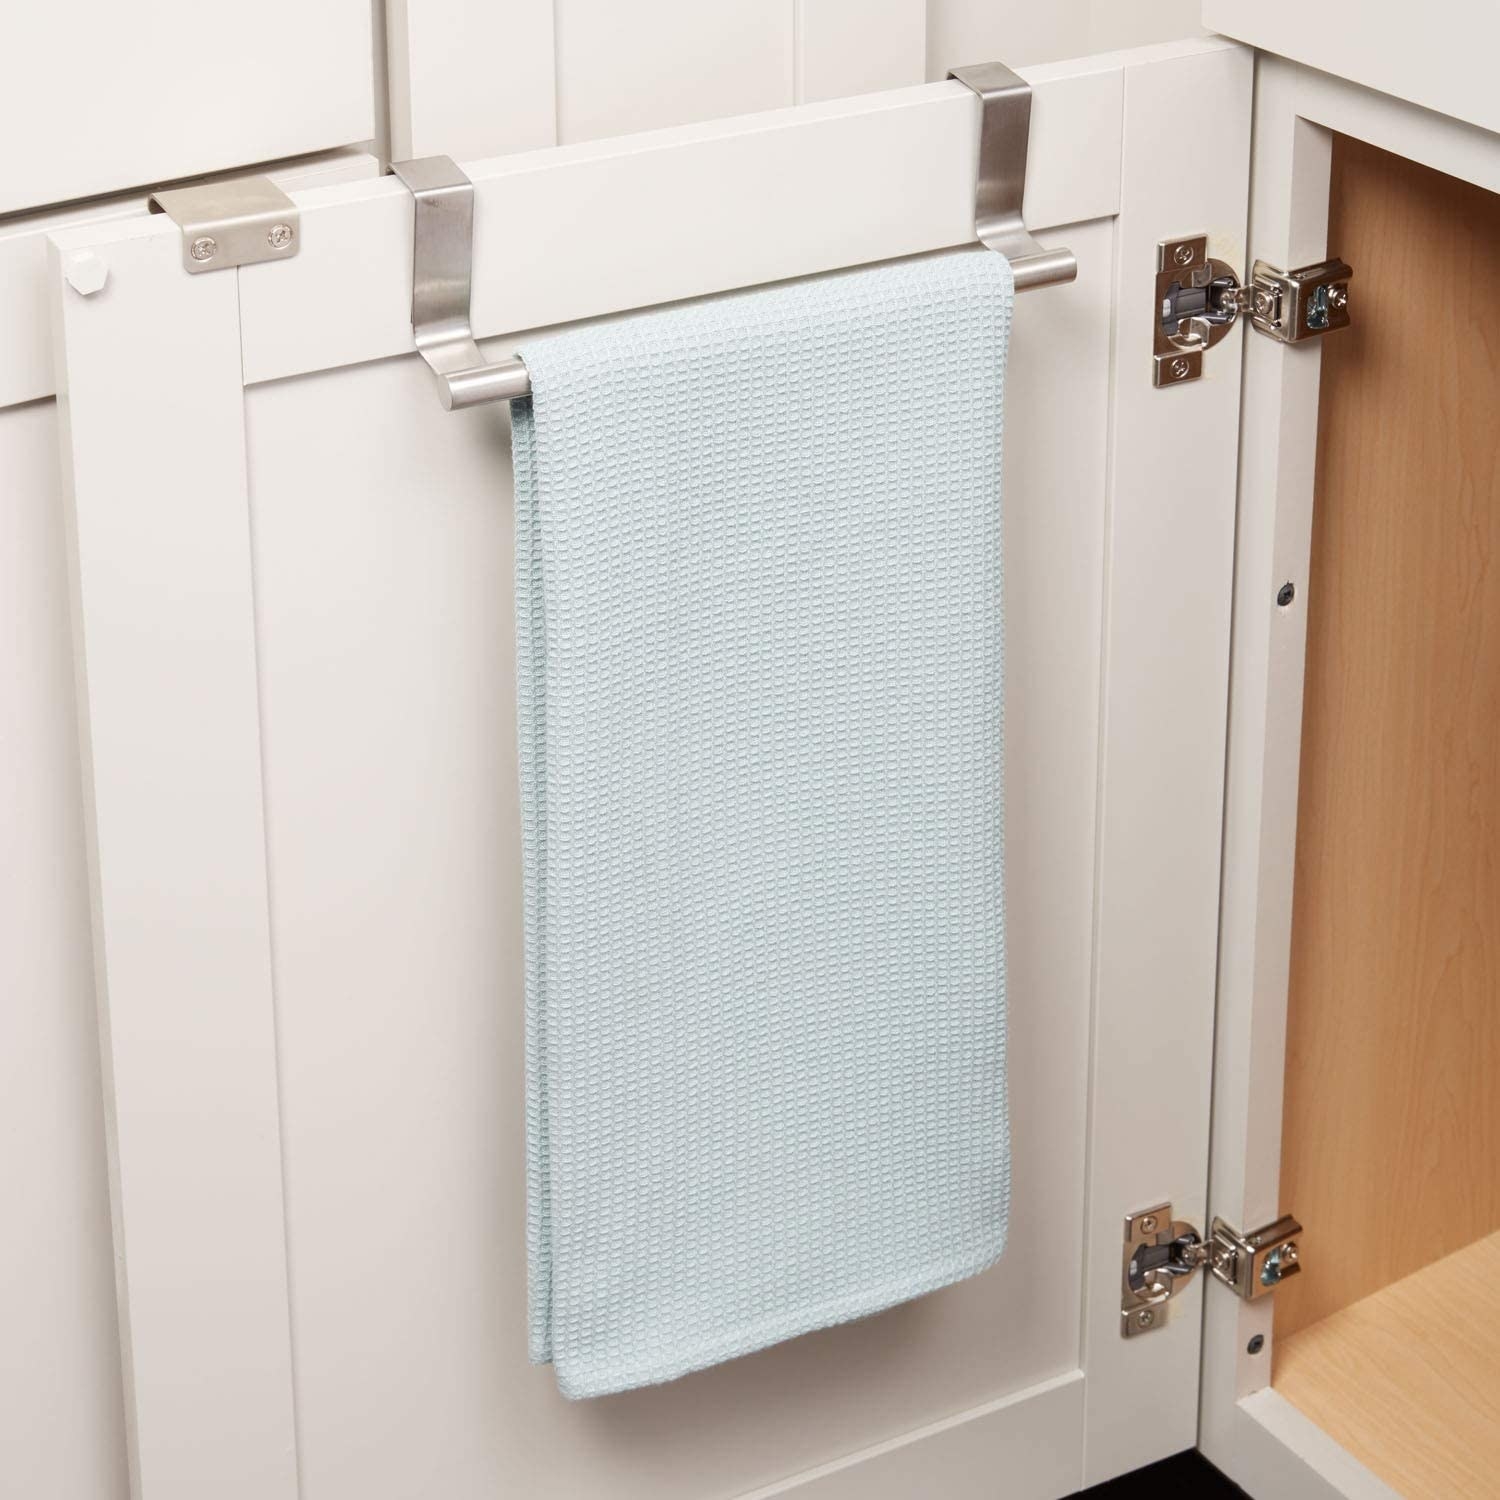 The towel bar, with a dishrag on it, hanging to face the inside of a cabinet door